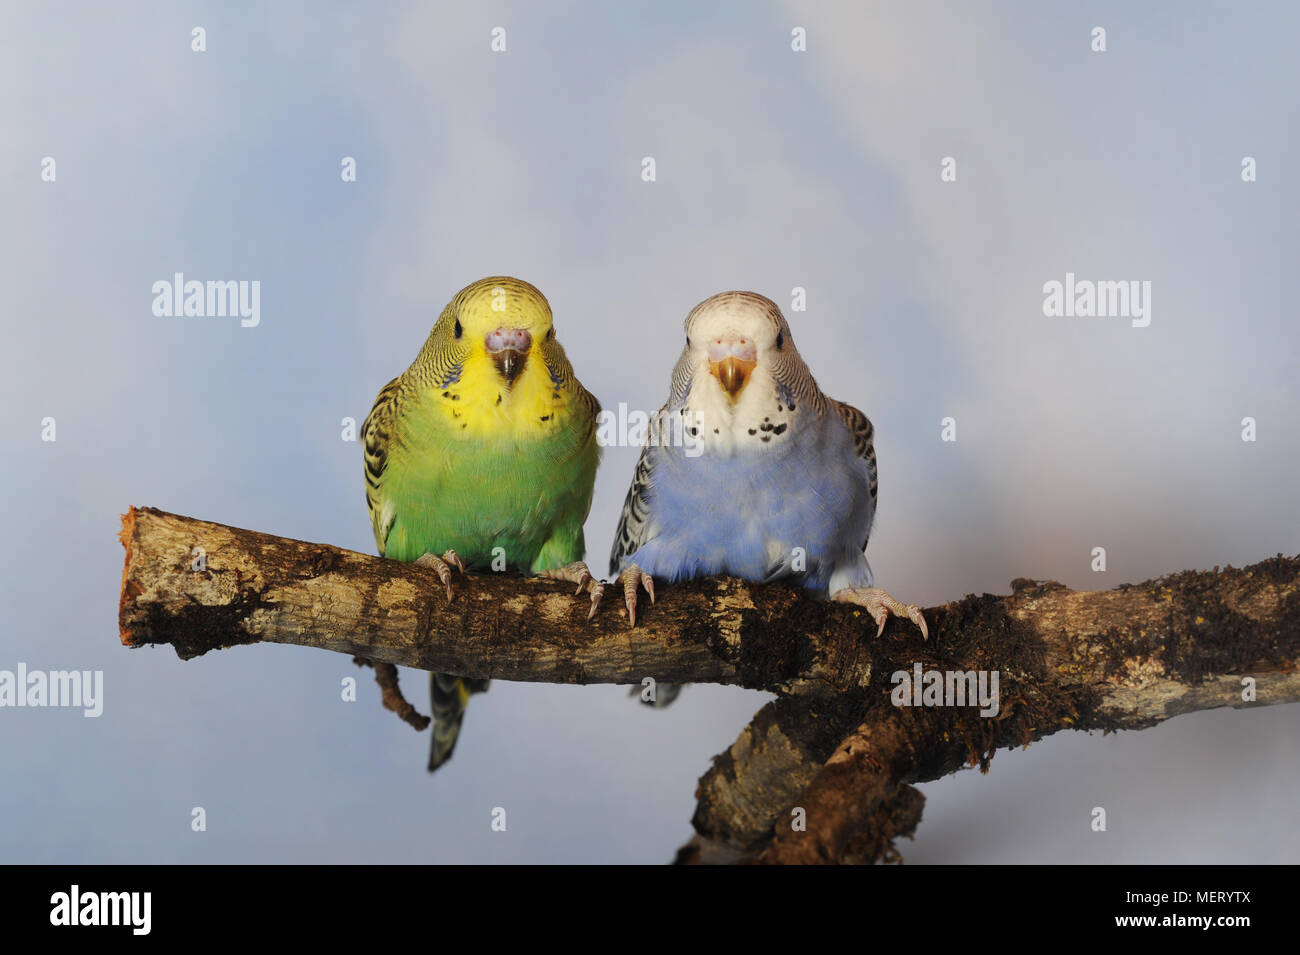 Young budgies, green-yellow and blue-white, sitting on branch Stock Photo